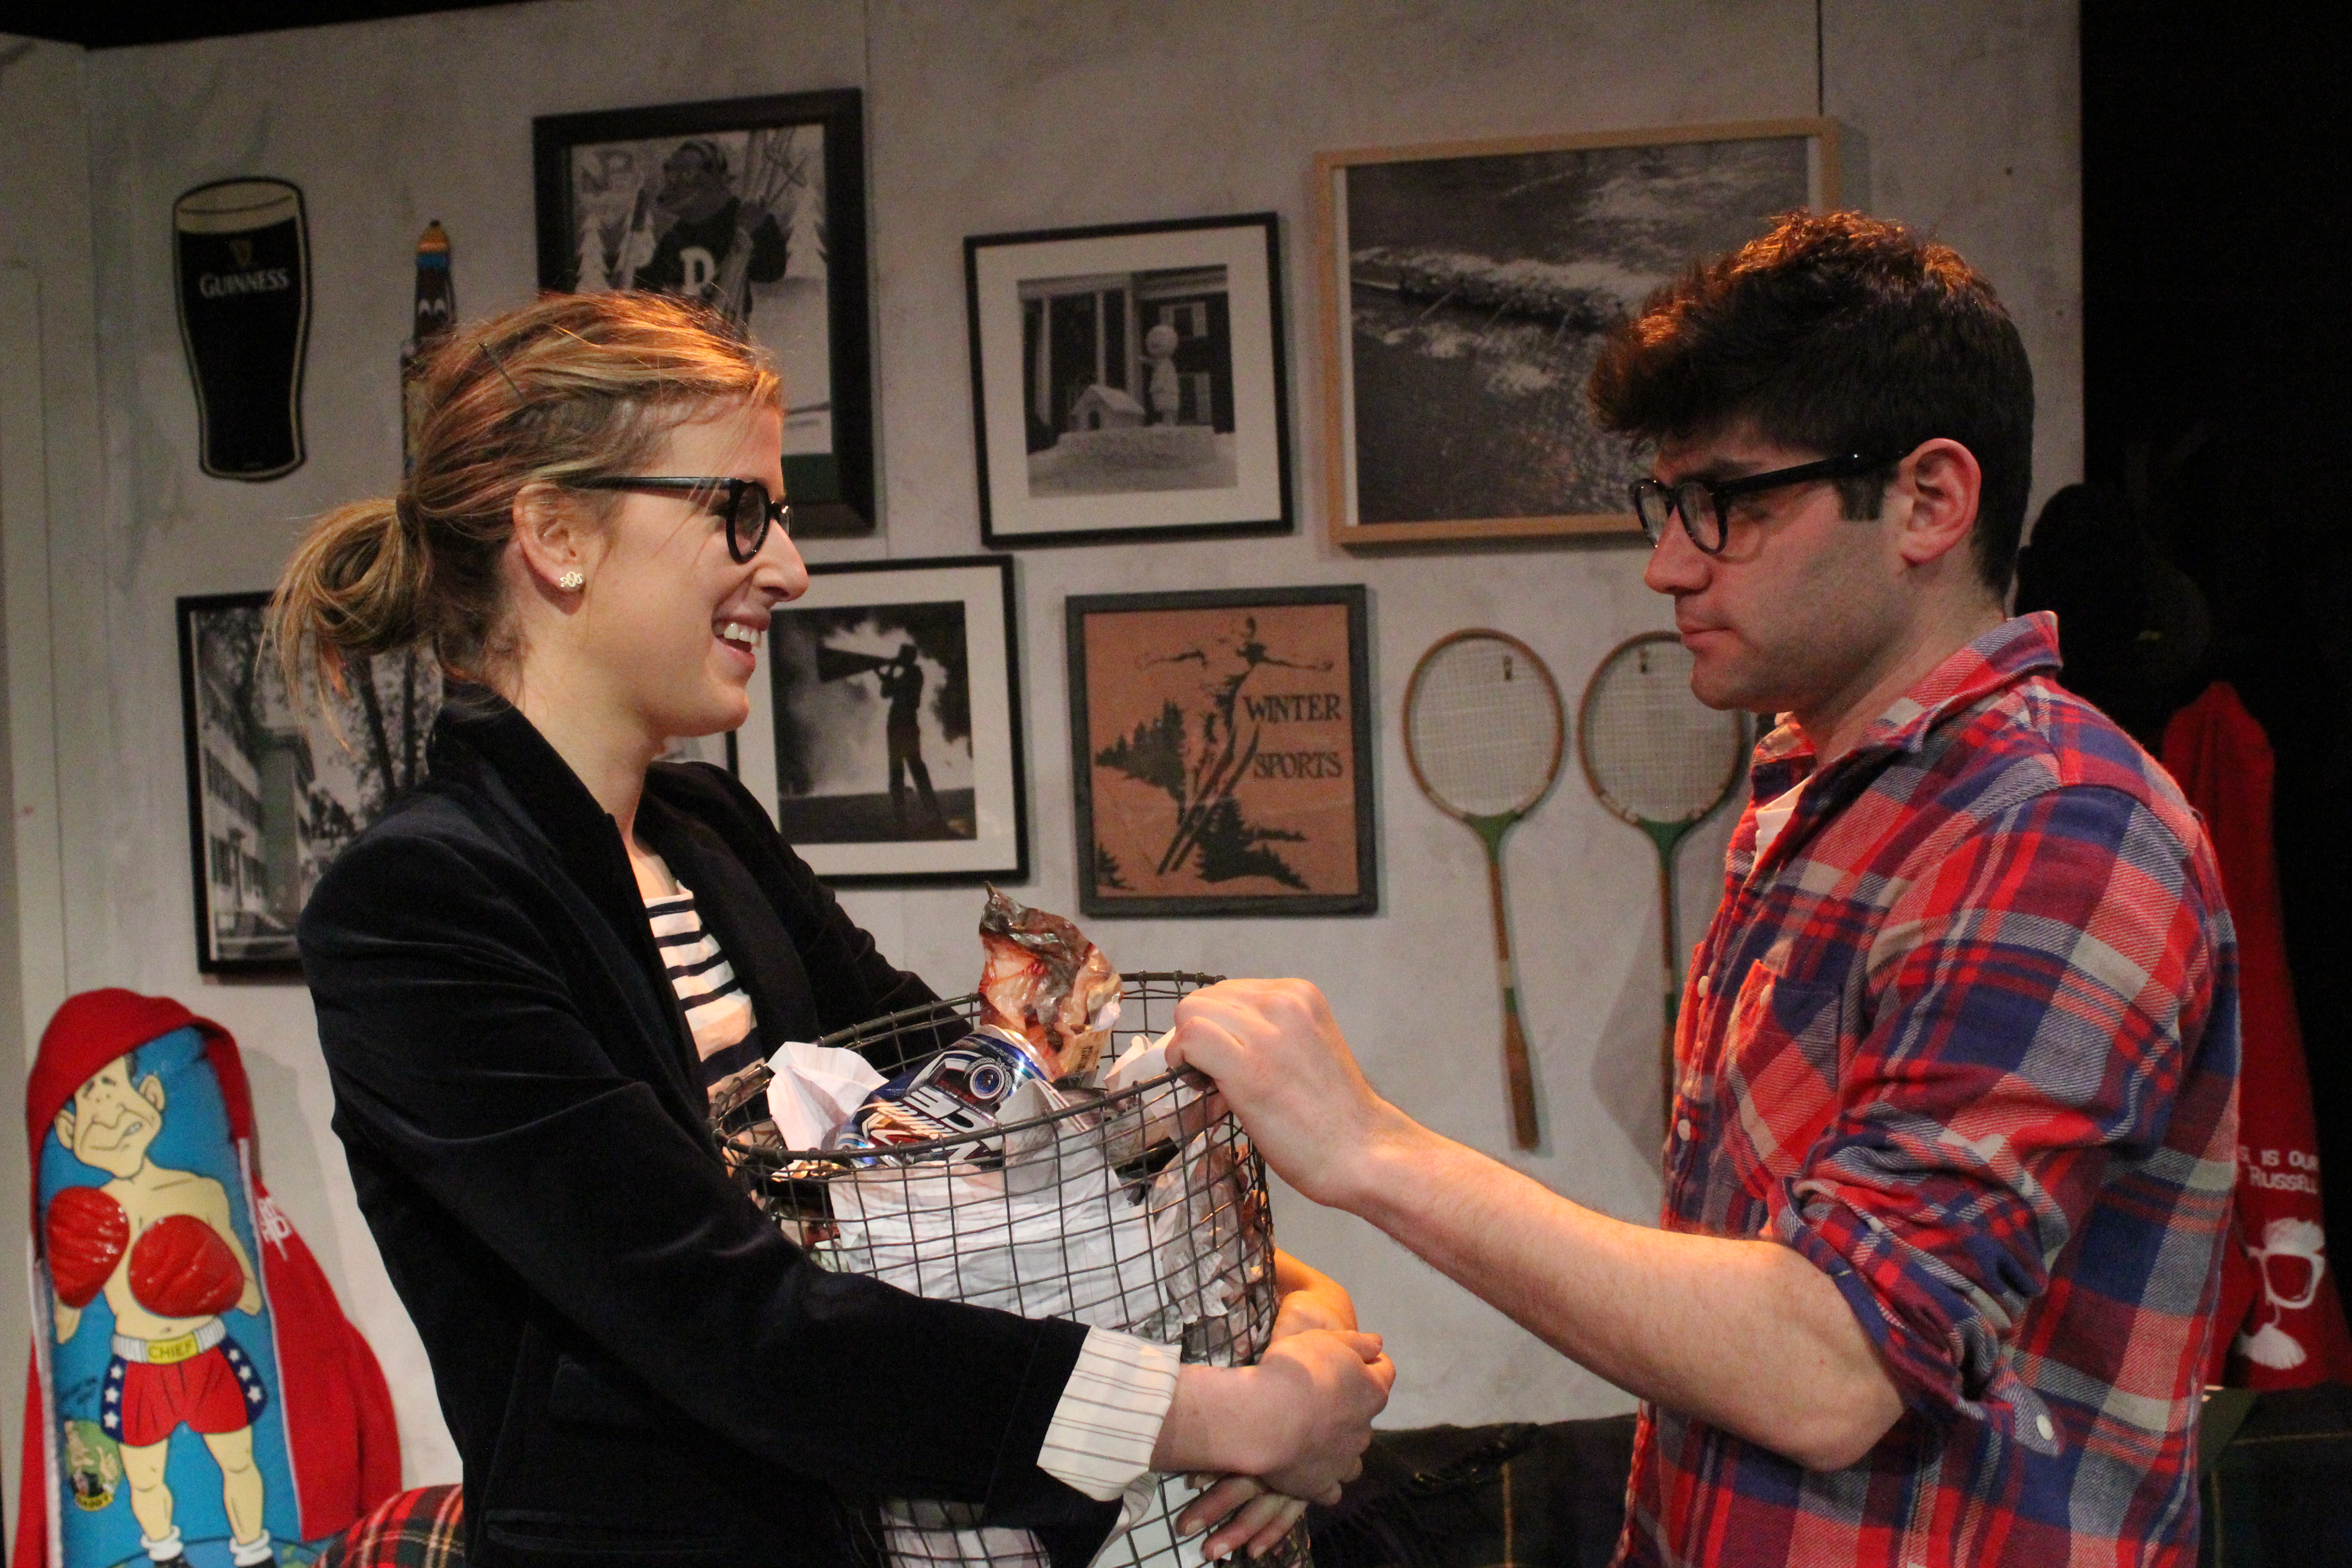 IMPROVed, a comedy in two acts: the Gene Frankel Theater, February 2012, written by Genevieve Adams directed by Jon Goracy